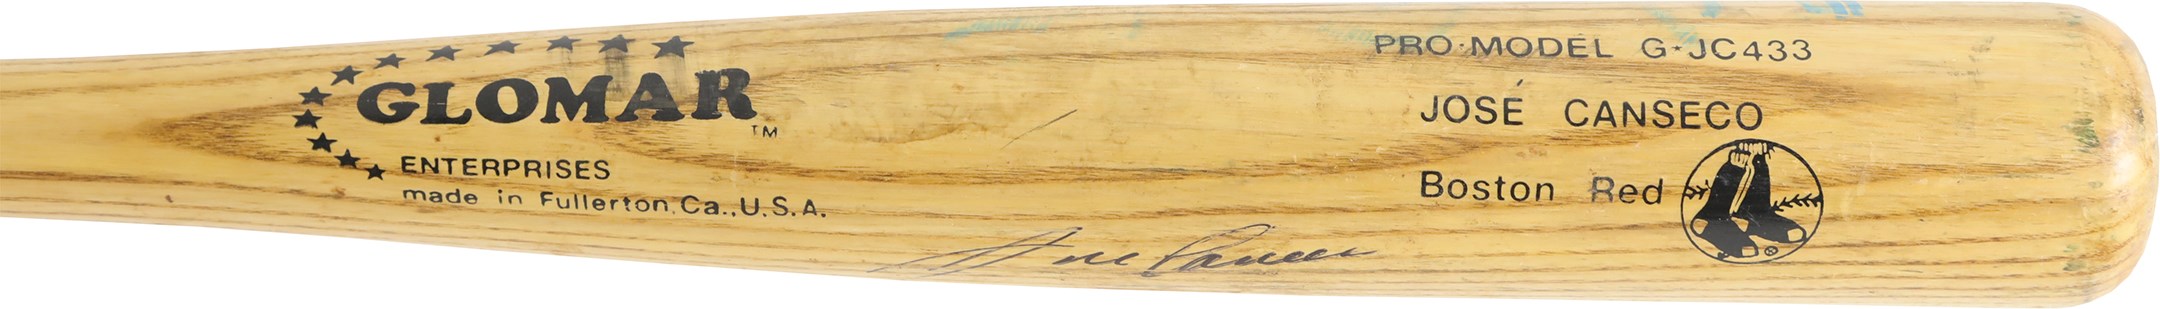 - 1995-96 Jose Canseco Signed Game Used Bat